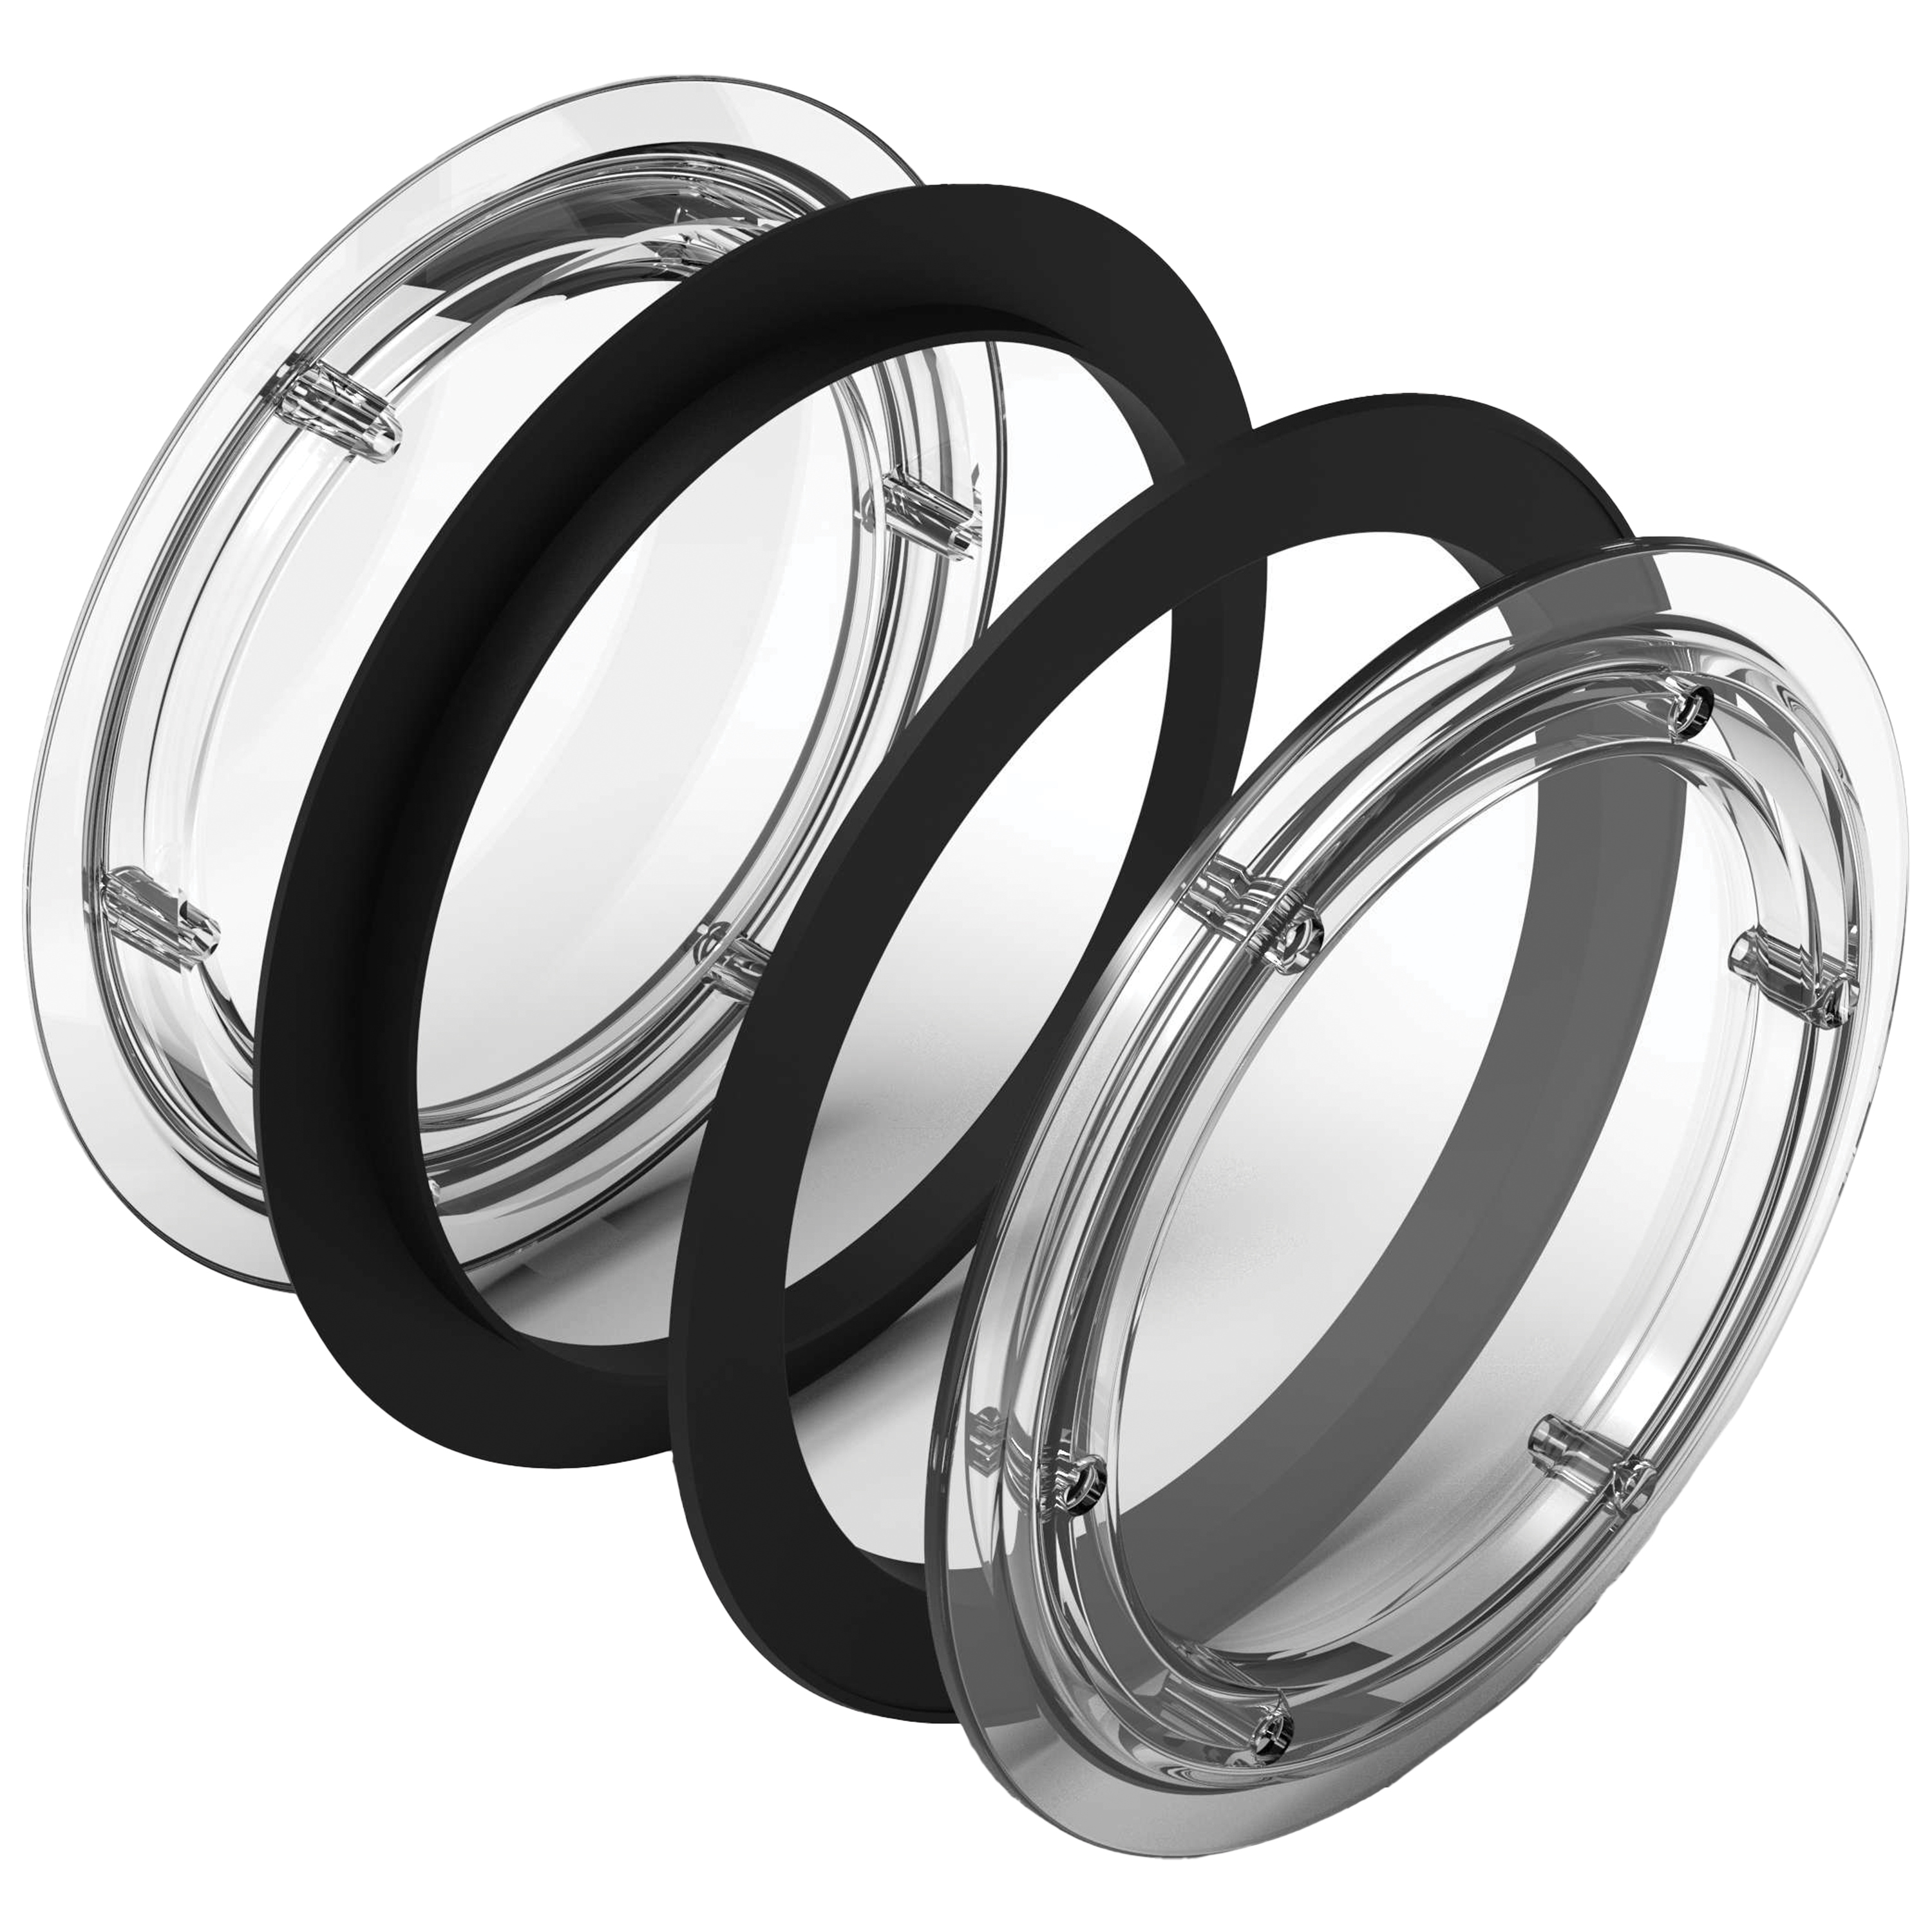 C004 - ROUND PORTHOLES with GASKETS